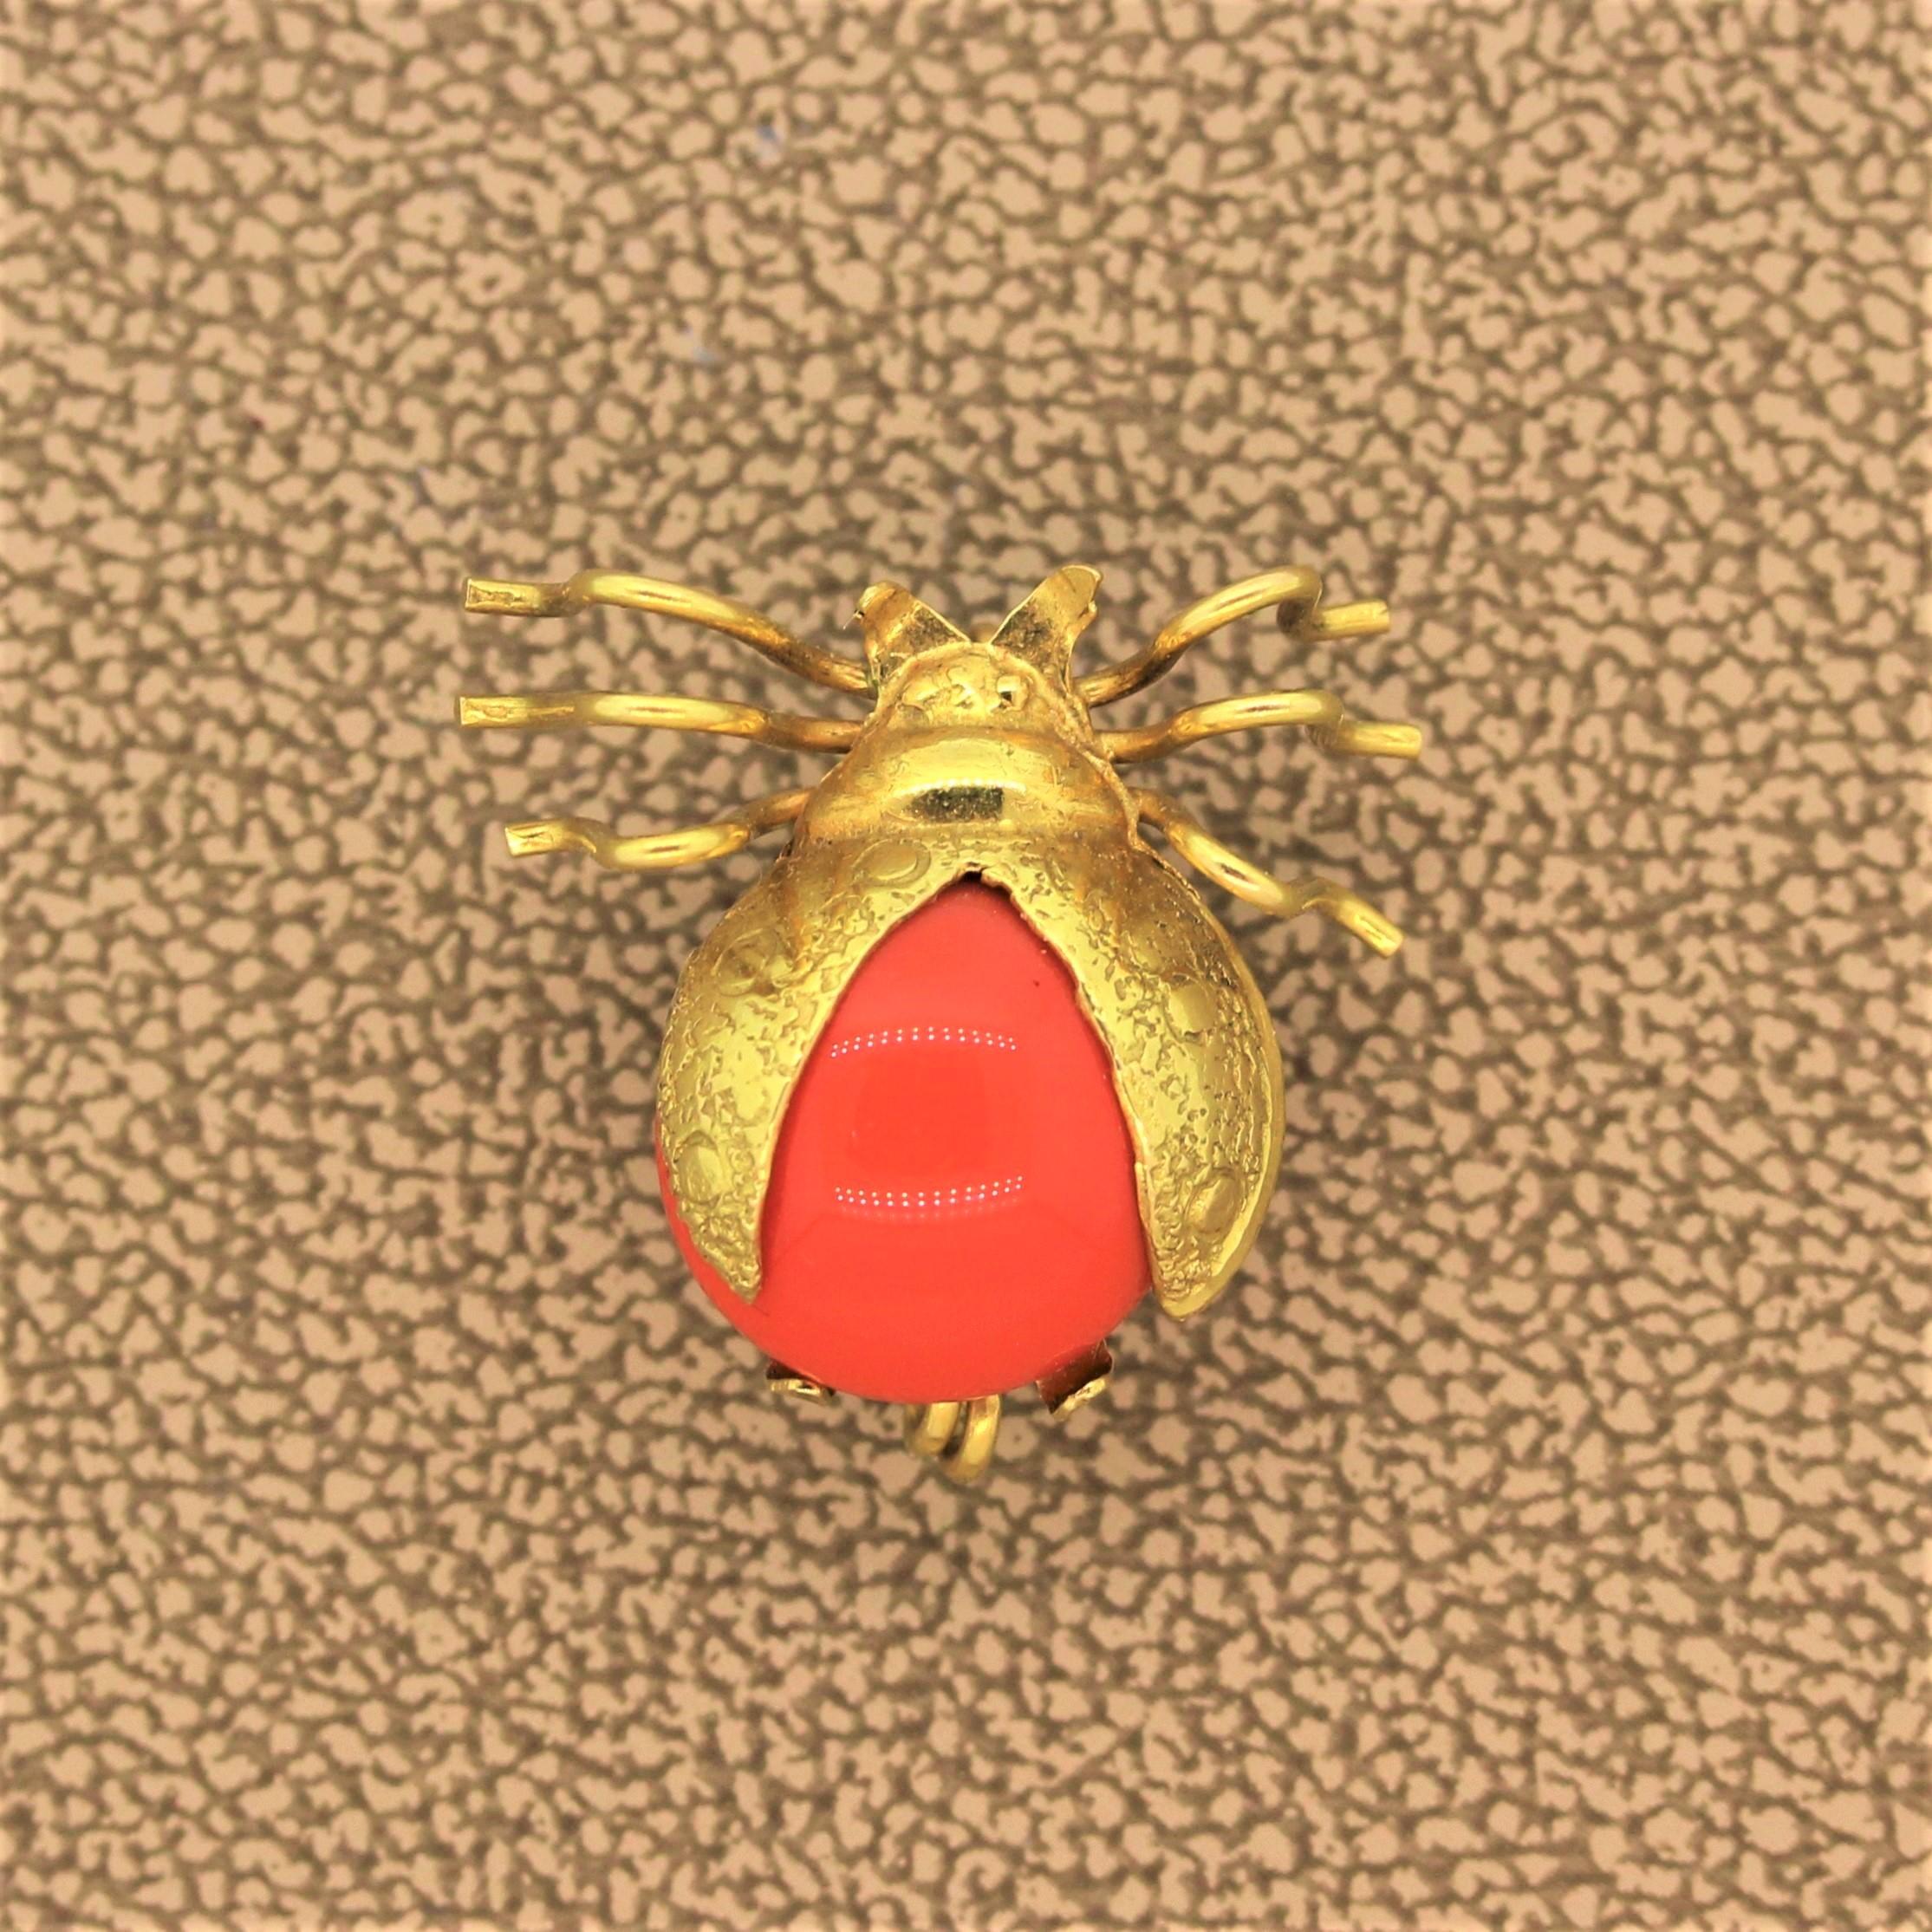 Ladybug! A sweet crawling ladybug with her wings sprawled out ready to take flight. This piece doubles as a pendant to wear on the chest. The body is a cabochon coral with 18K yellow gold used for the filigreed wings and her long legs.  

Brooch